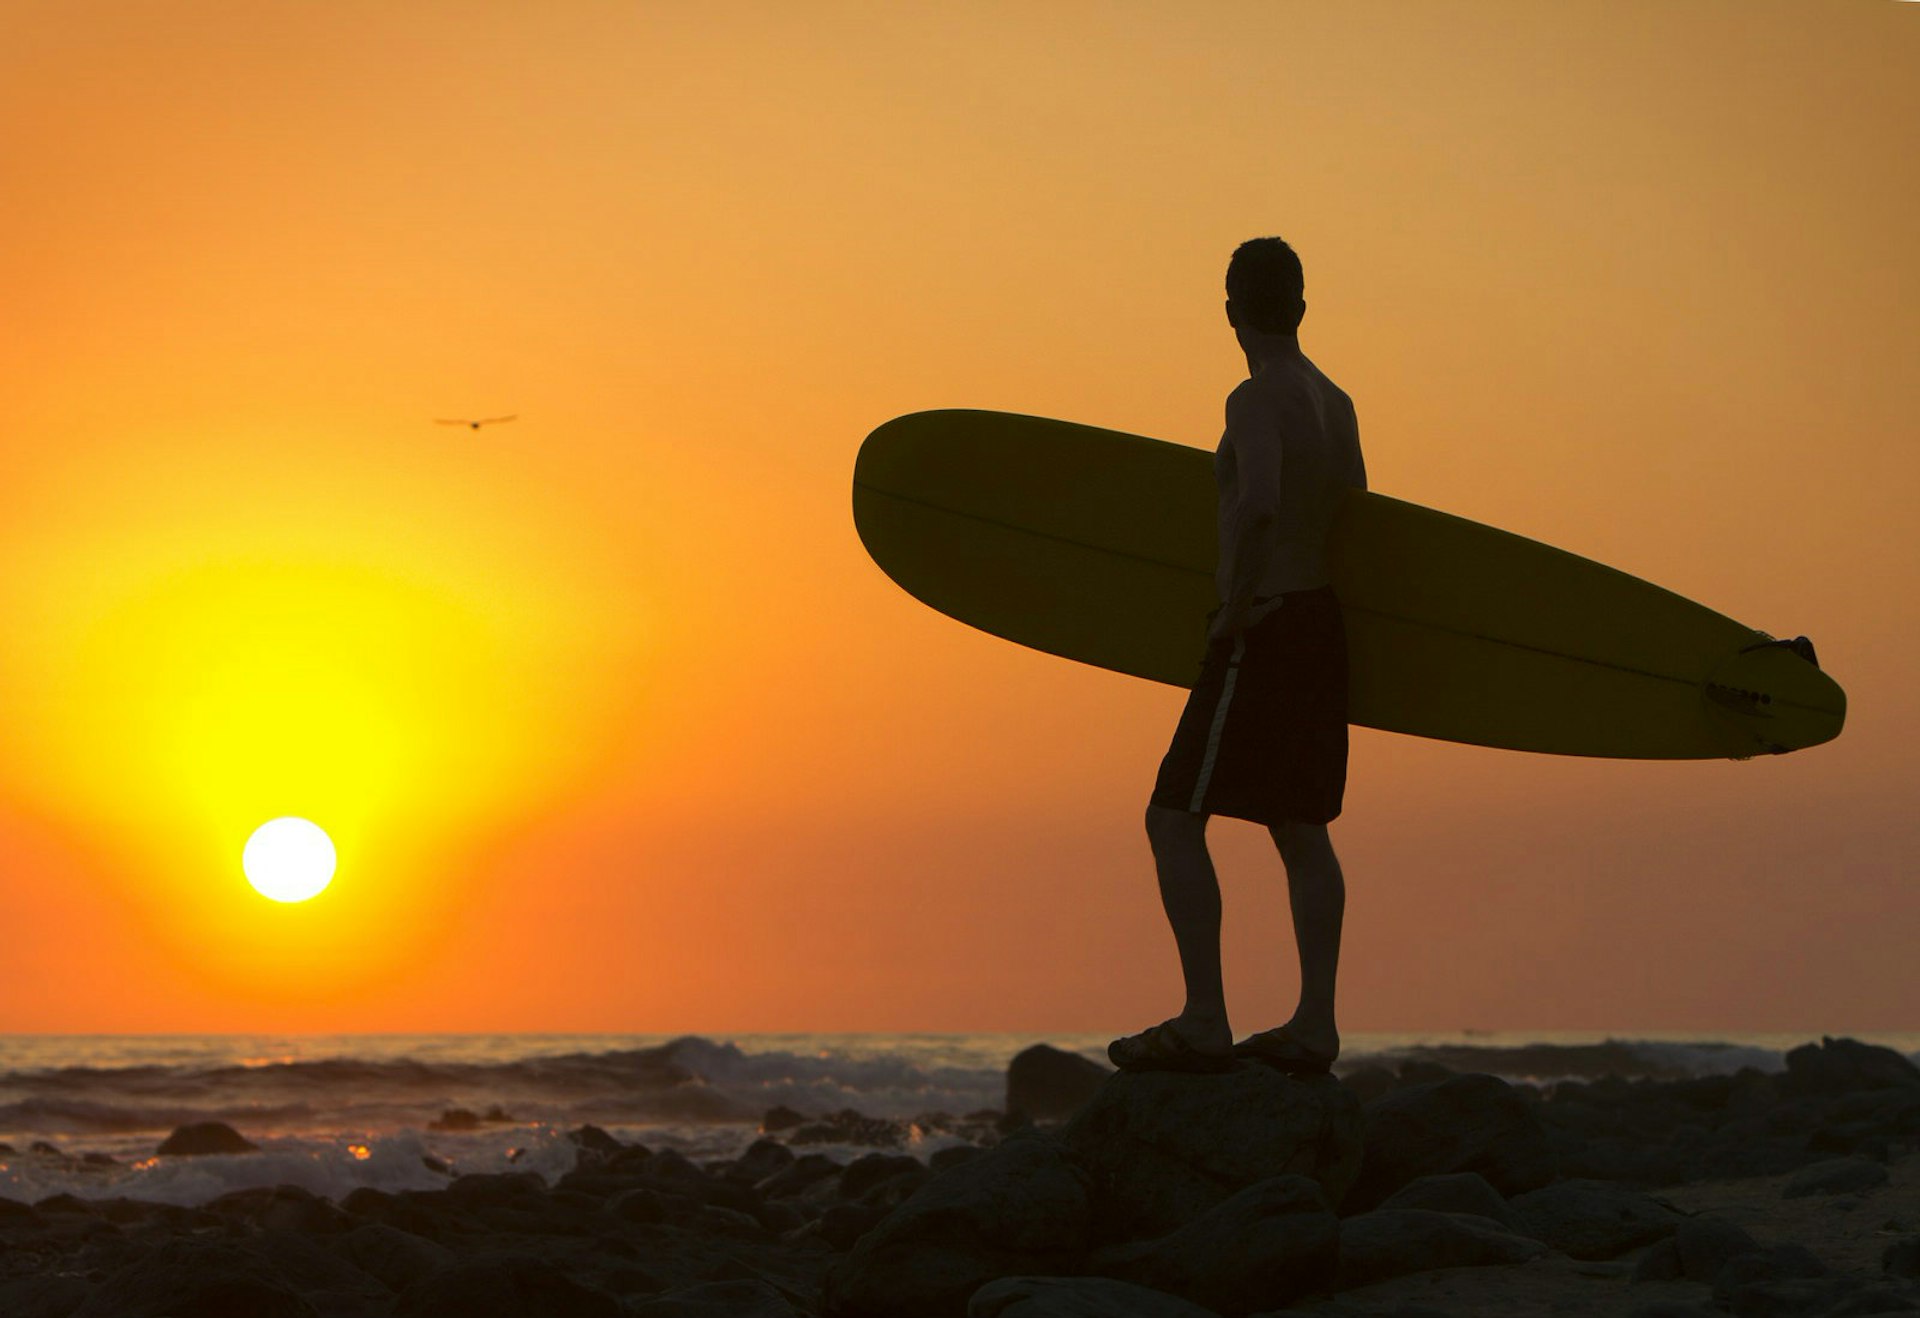 Lesser-known surfing spots – A silhouette of a surfer standing on the shore as the sun sets.